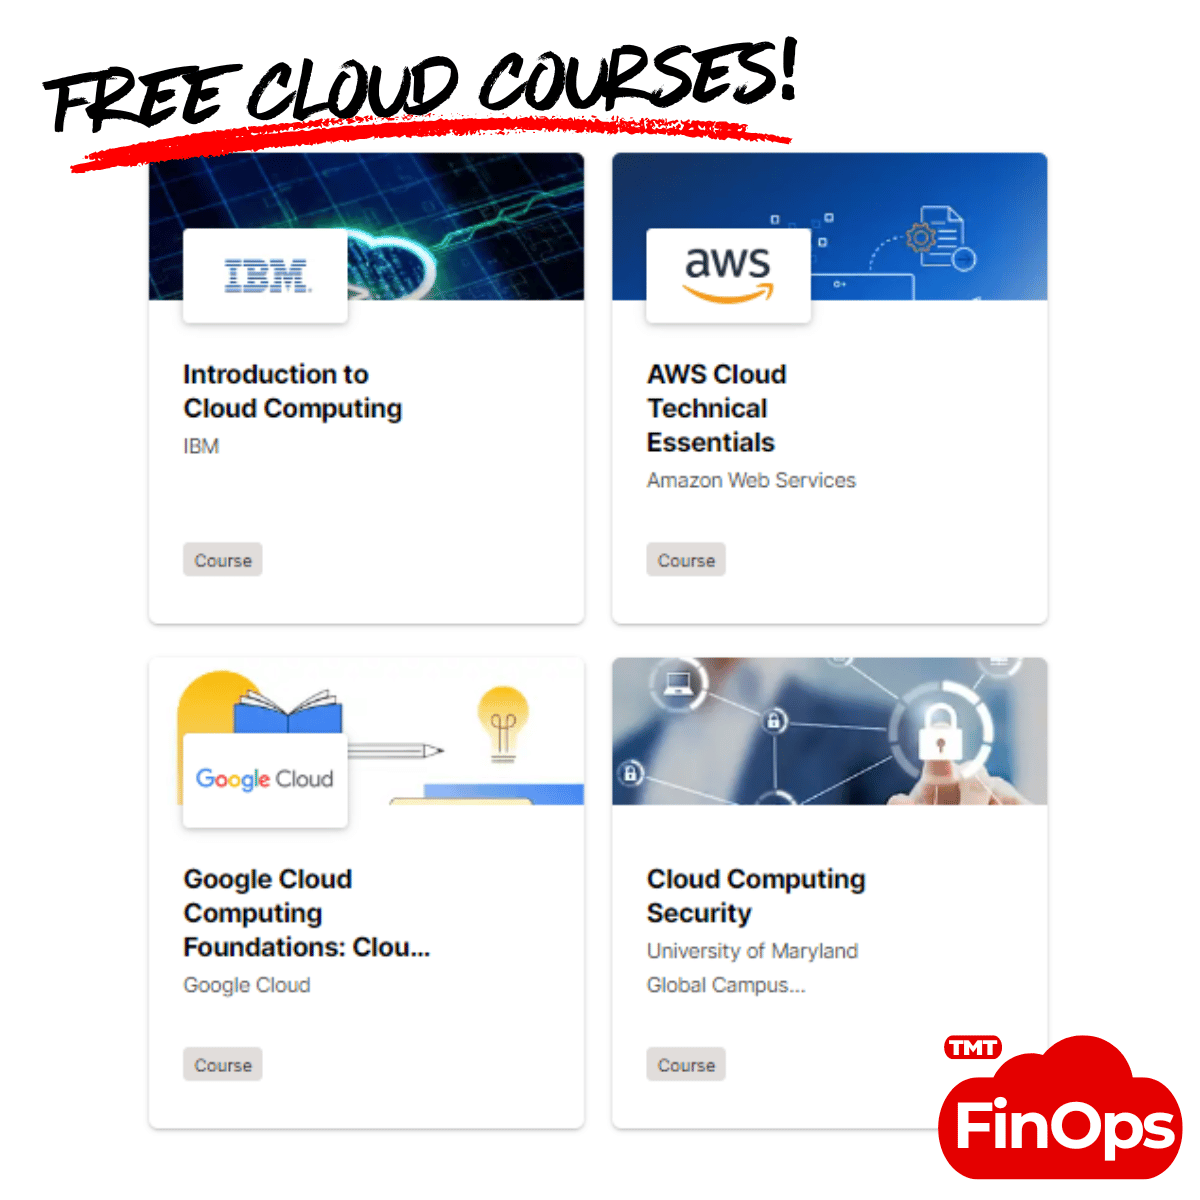 Dive into free courses on edX that could be your ticket to the big leagues.

🚀 𝗬𝗢𝗨𝗥 𝗡𝗘𝗫𝗧 𝗦𝗧𝗘𝗣𝗦
Jump on these free courses now and start paving your way to a six-figure career in cloud technology! 
vist.ly/34nmc

#finops #cloudengineer #career #aws #gcp